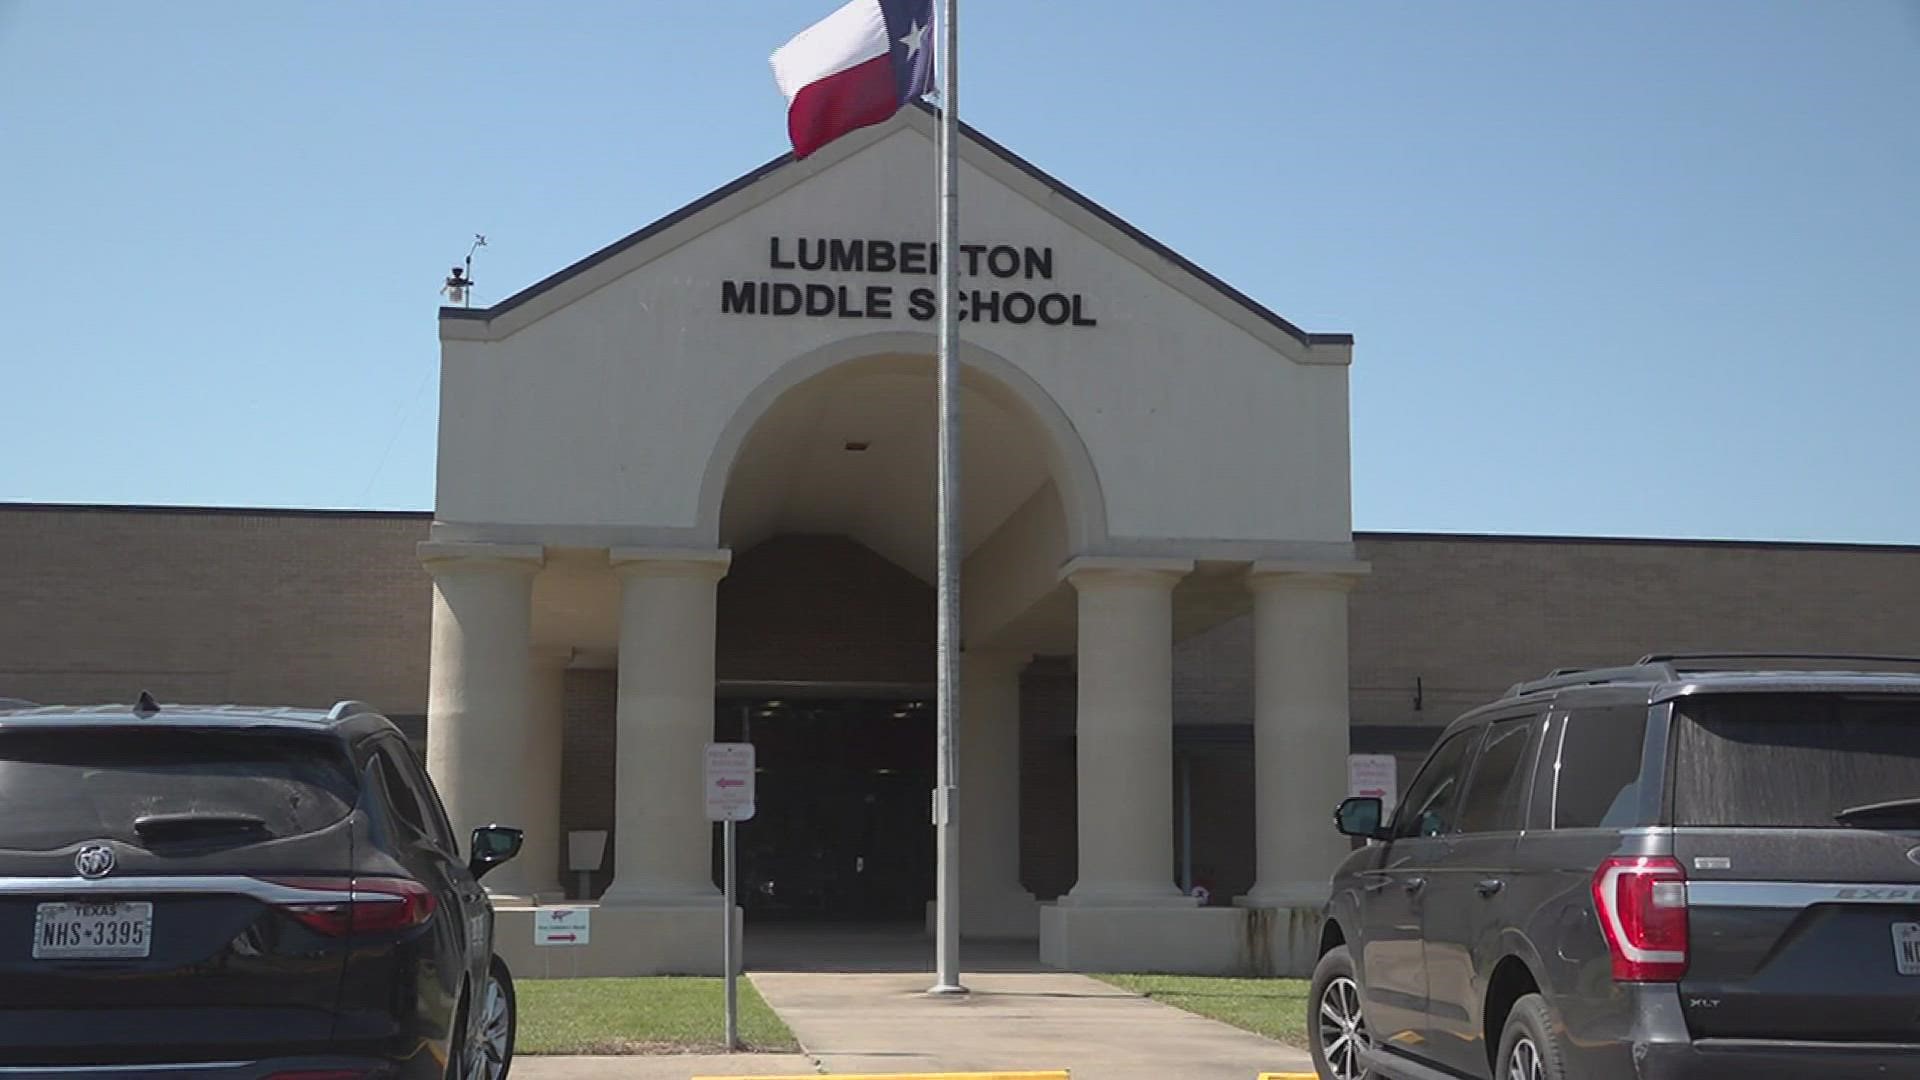 Lumberton Police Chief Danny Sullins tells 12News because the student is a minor, he will likely receive some sort of rehabilitation from this incident.